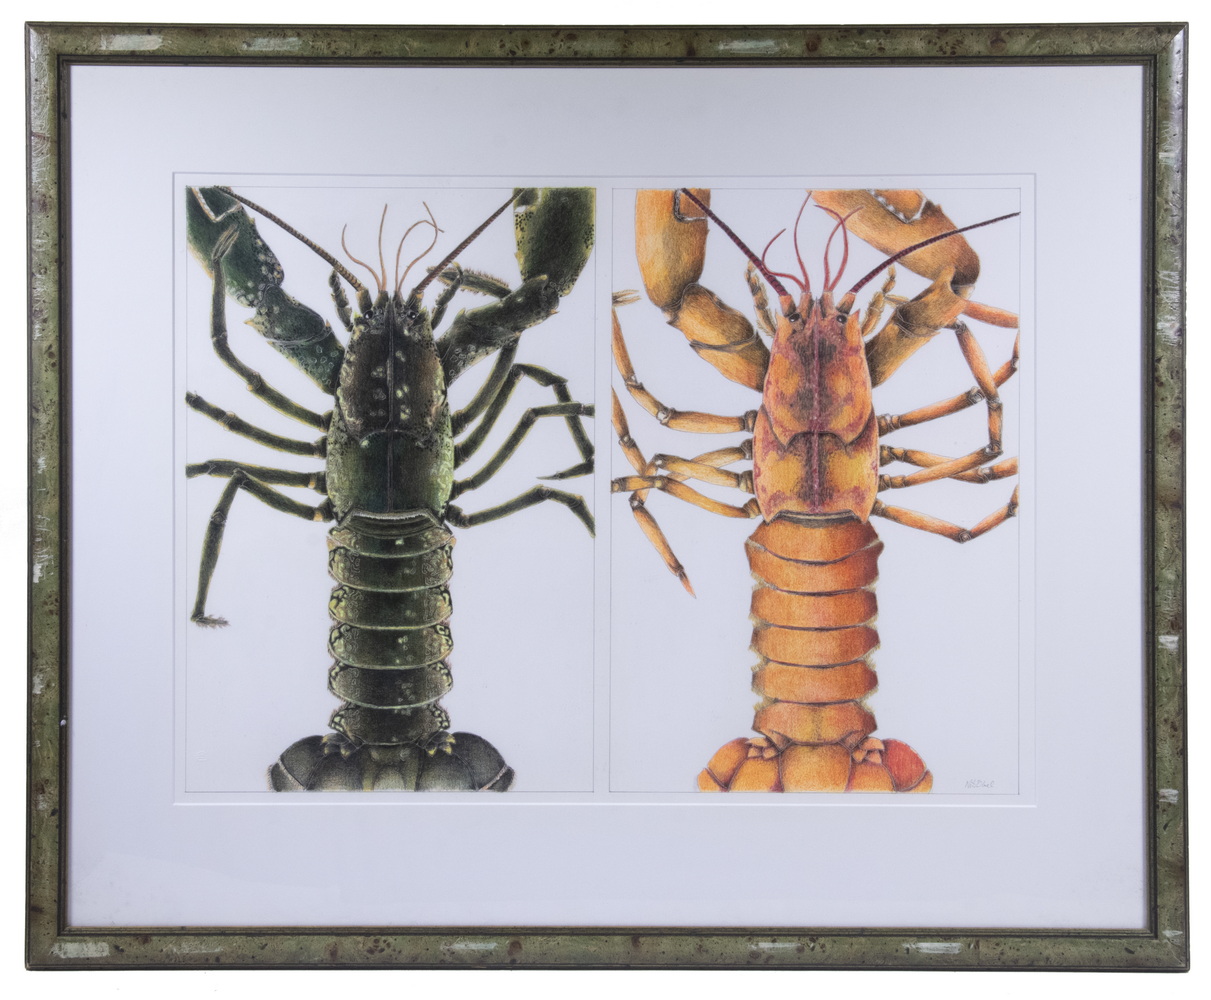 NILS OBEL (ME, 1937-2018) Two Lobsters,